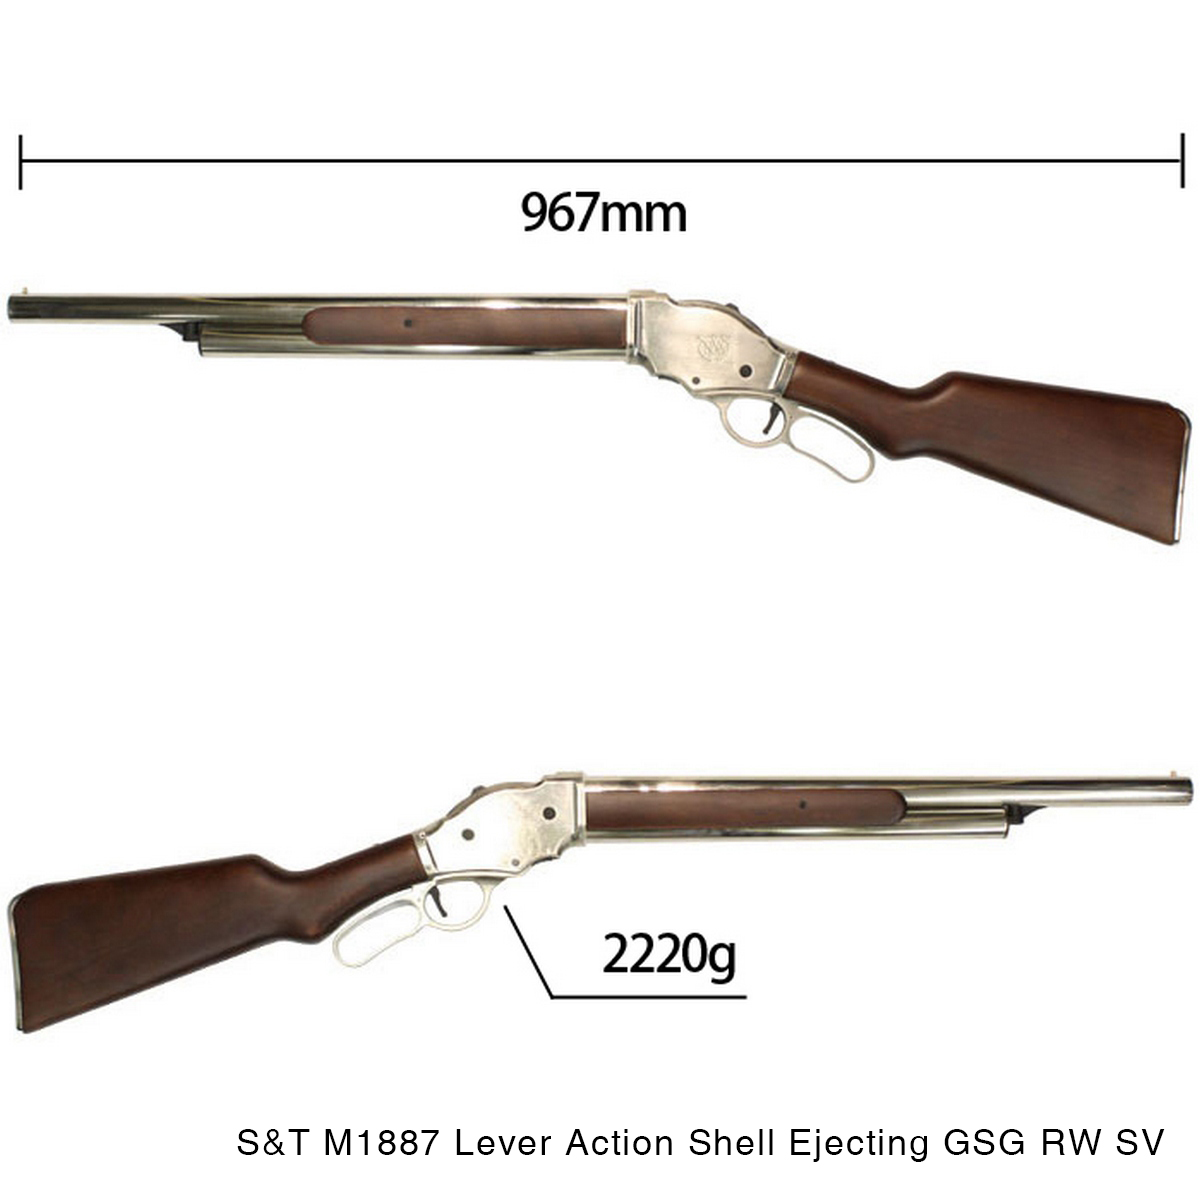 ST M1887 - new versions of gas powered shotguns / WMASG.com - Airsoft  binds us!